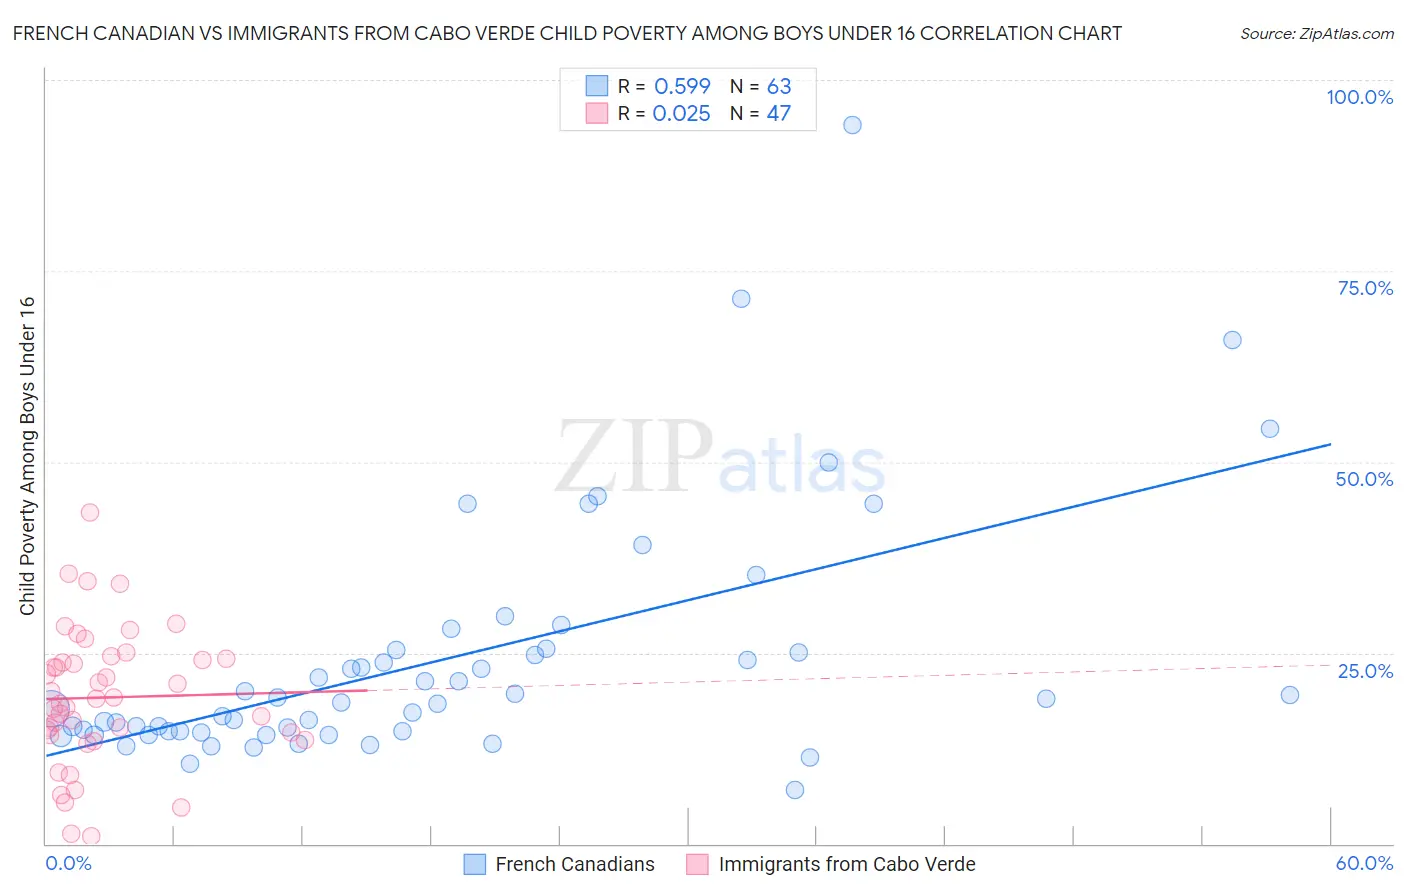 French Canadian vs Immigrants from Cabo Verde Child Poverty Among Boys Under 16